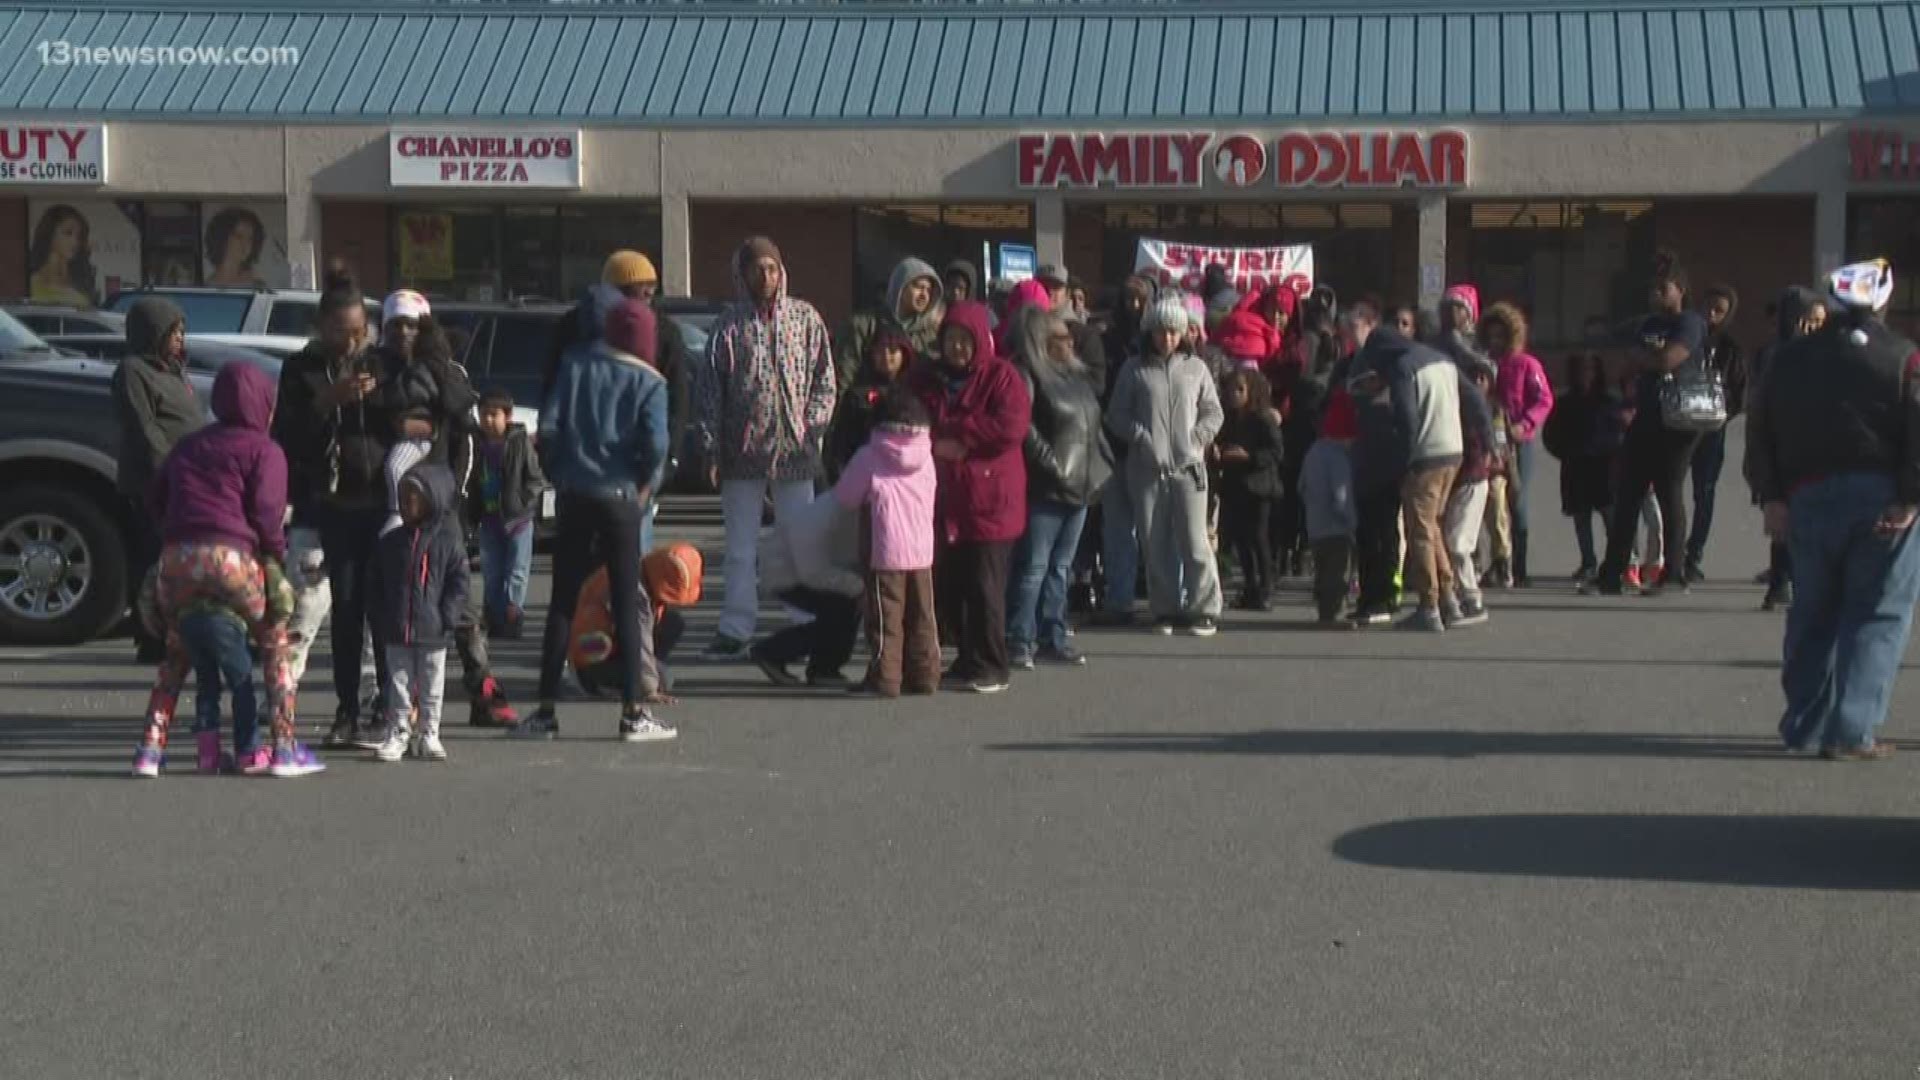 Around 1,500 kids walked away with Christmas presents thanks to the charity "The Noblemen" which hosted a giveaway in Virginia Beach.